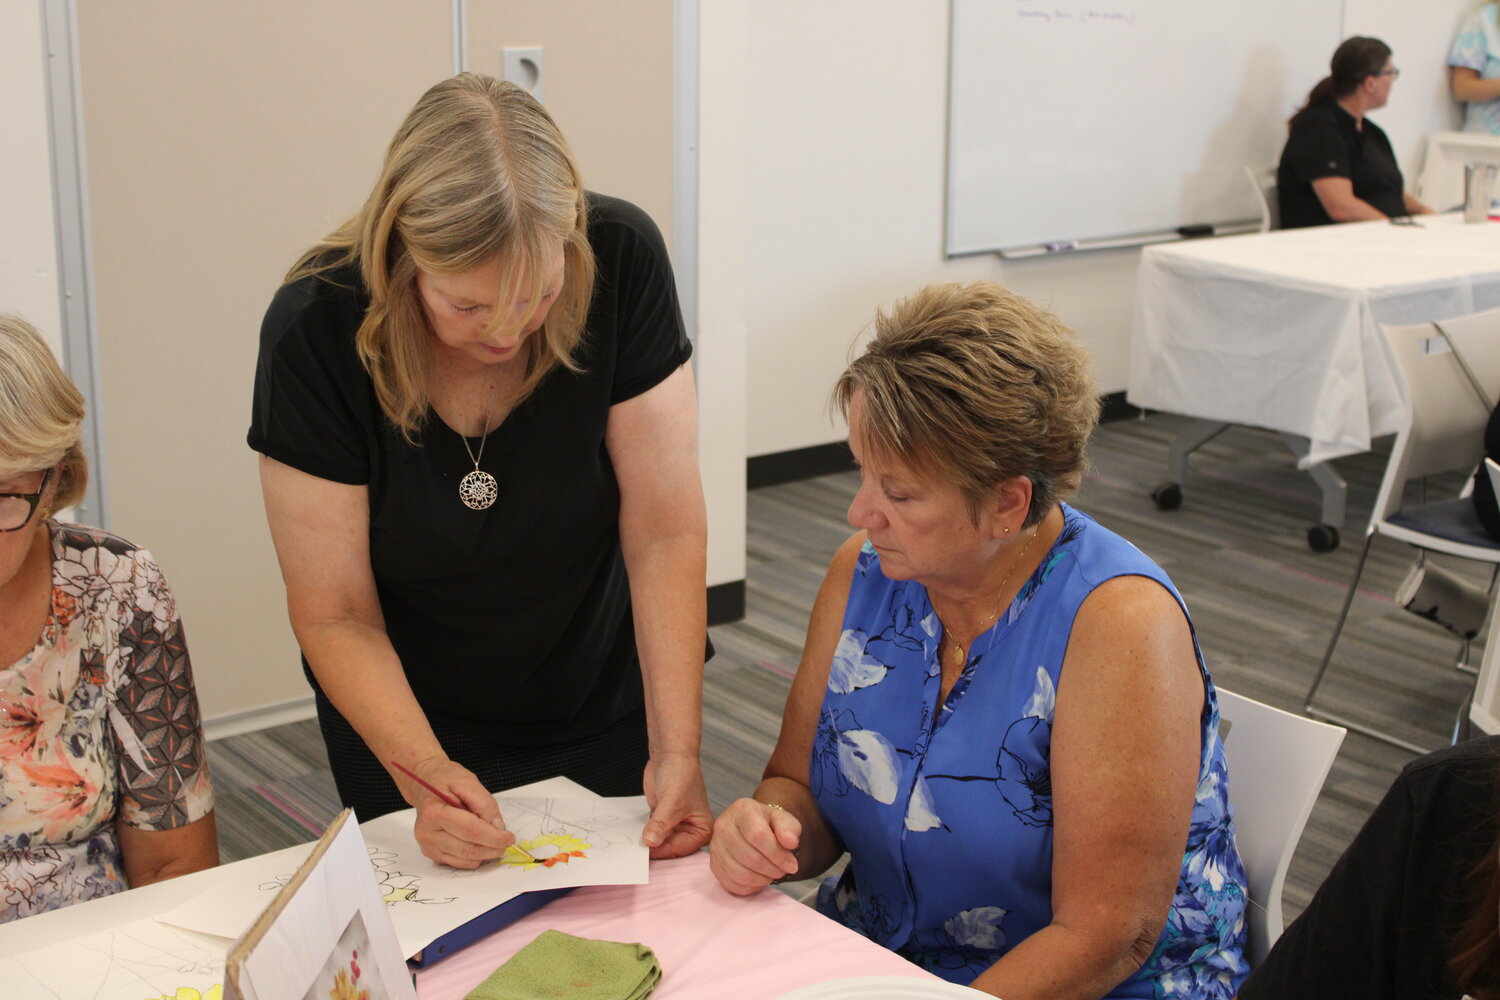 Instructor Carol Peper works with Diane Buxton on her watercolor painting.